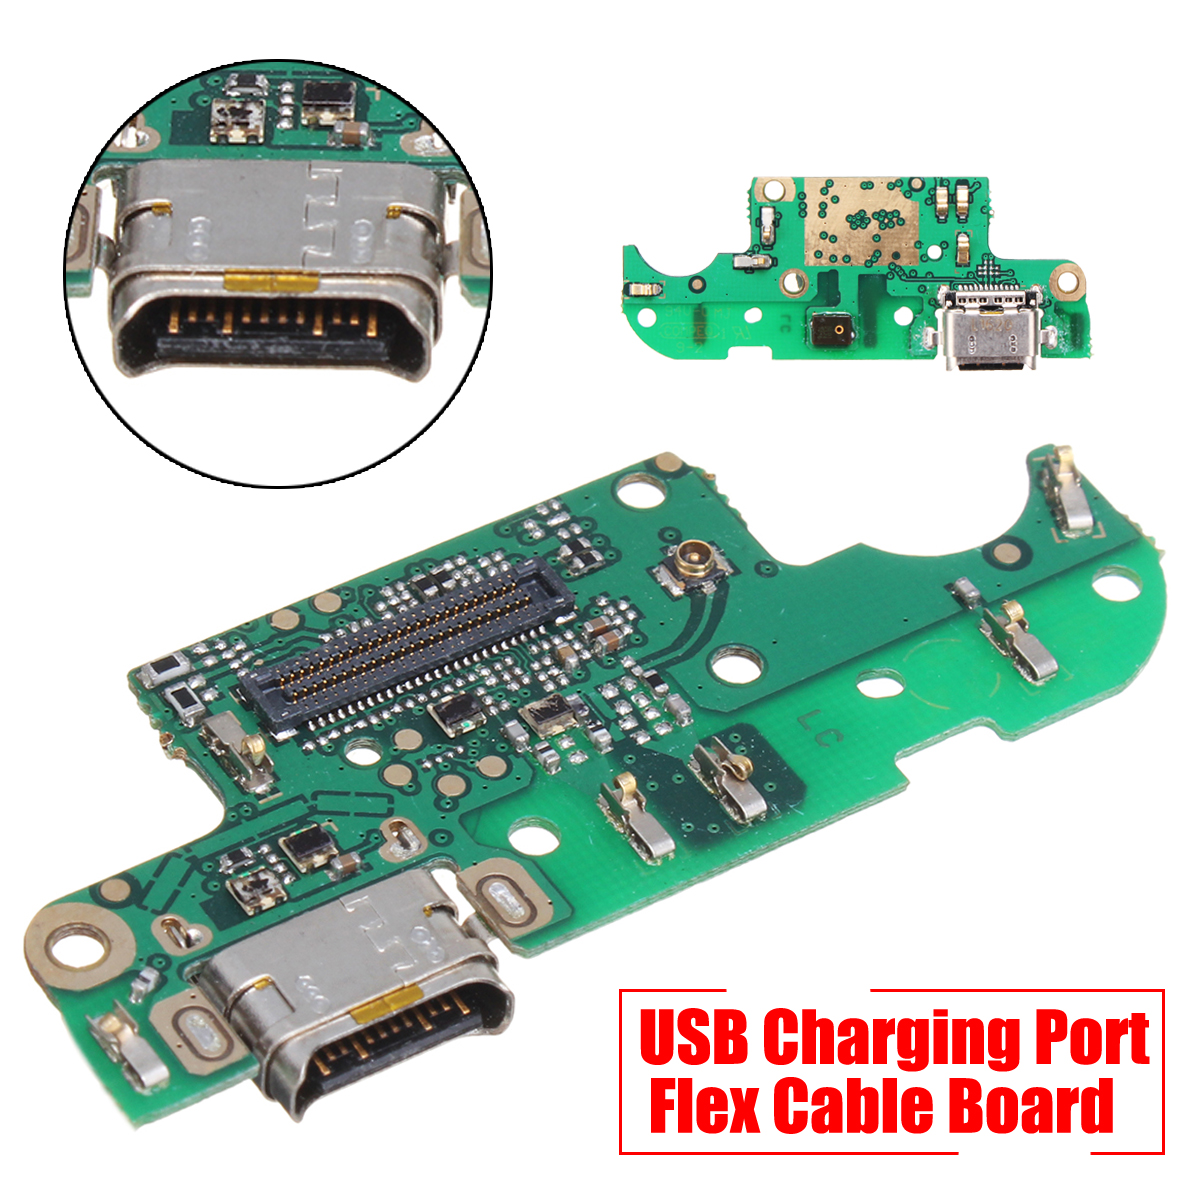 

USB Charging Port Flex Cable Board For Huawei/Google/Nexus 6P H1511 H1512 TYPE C